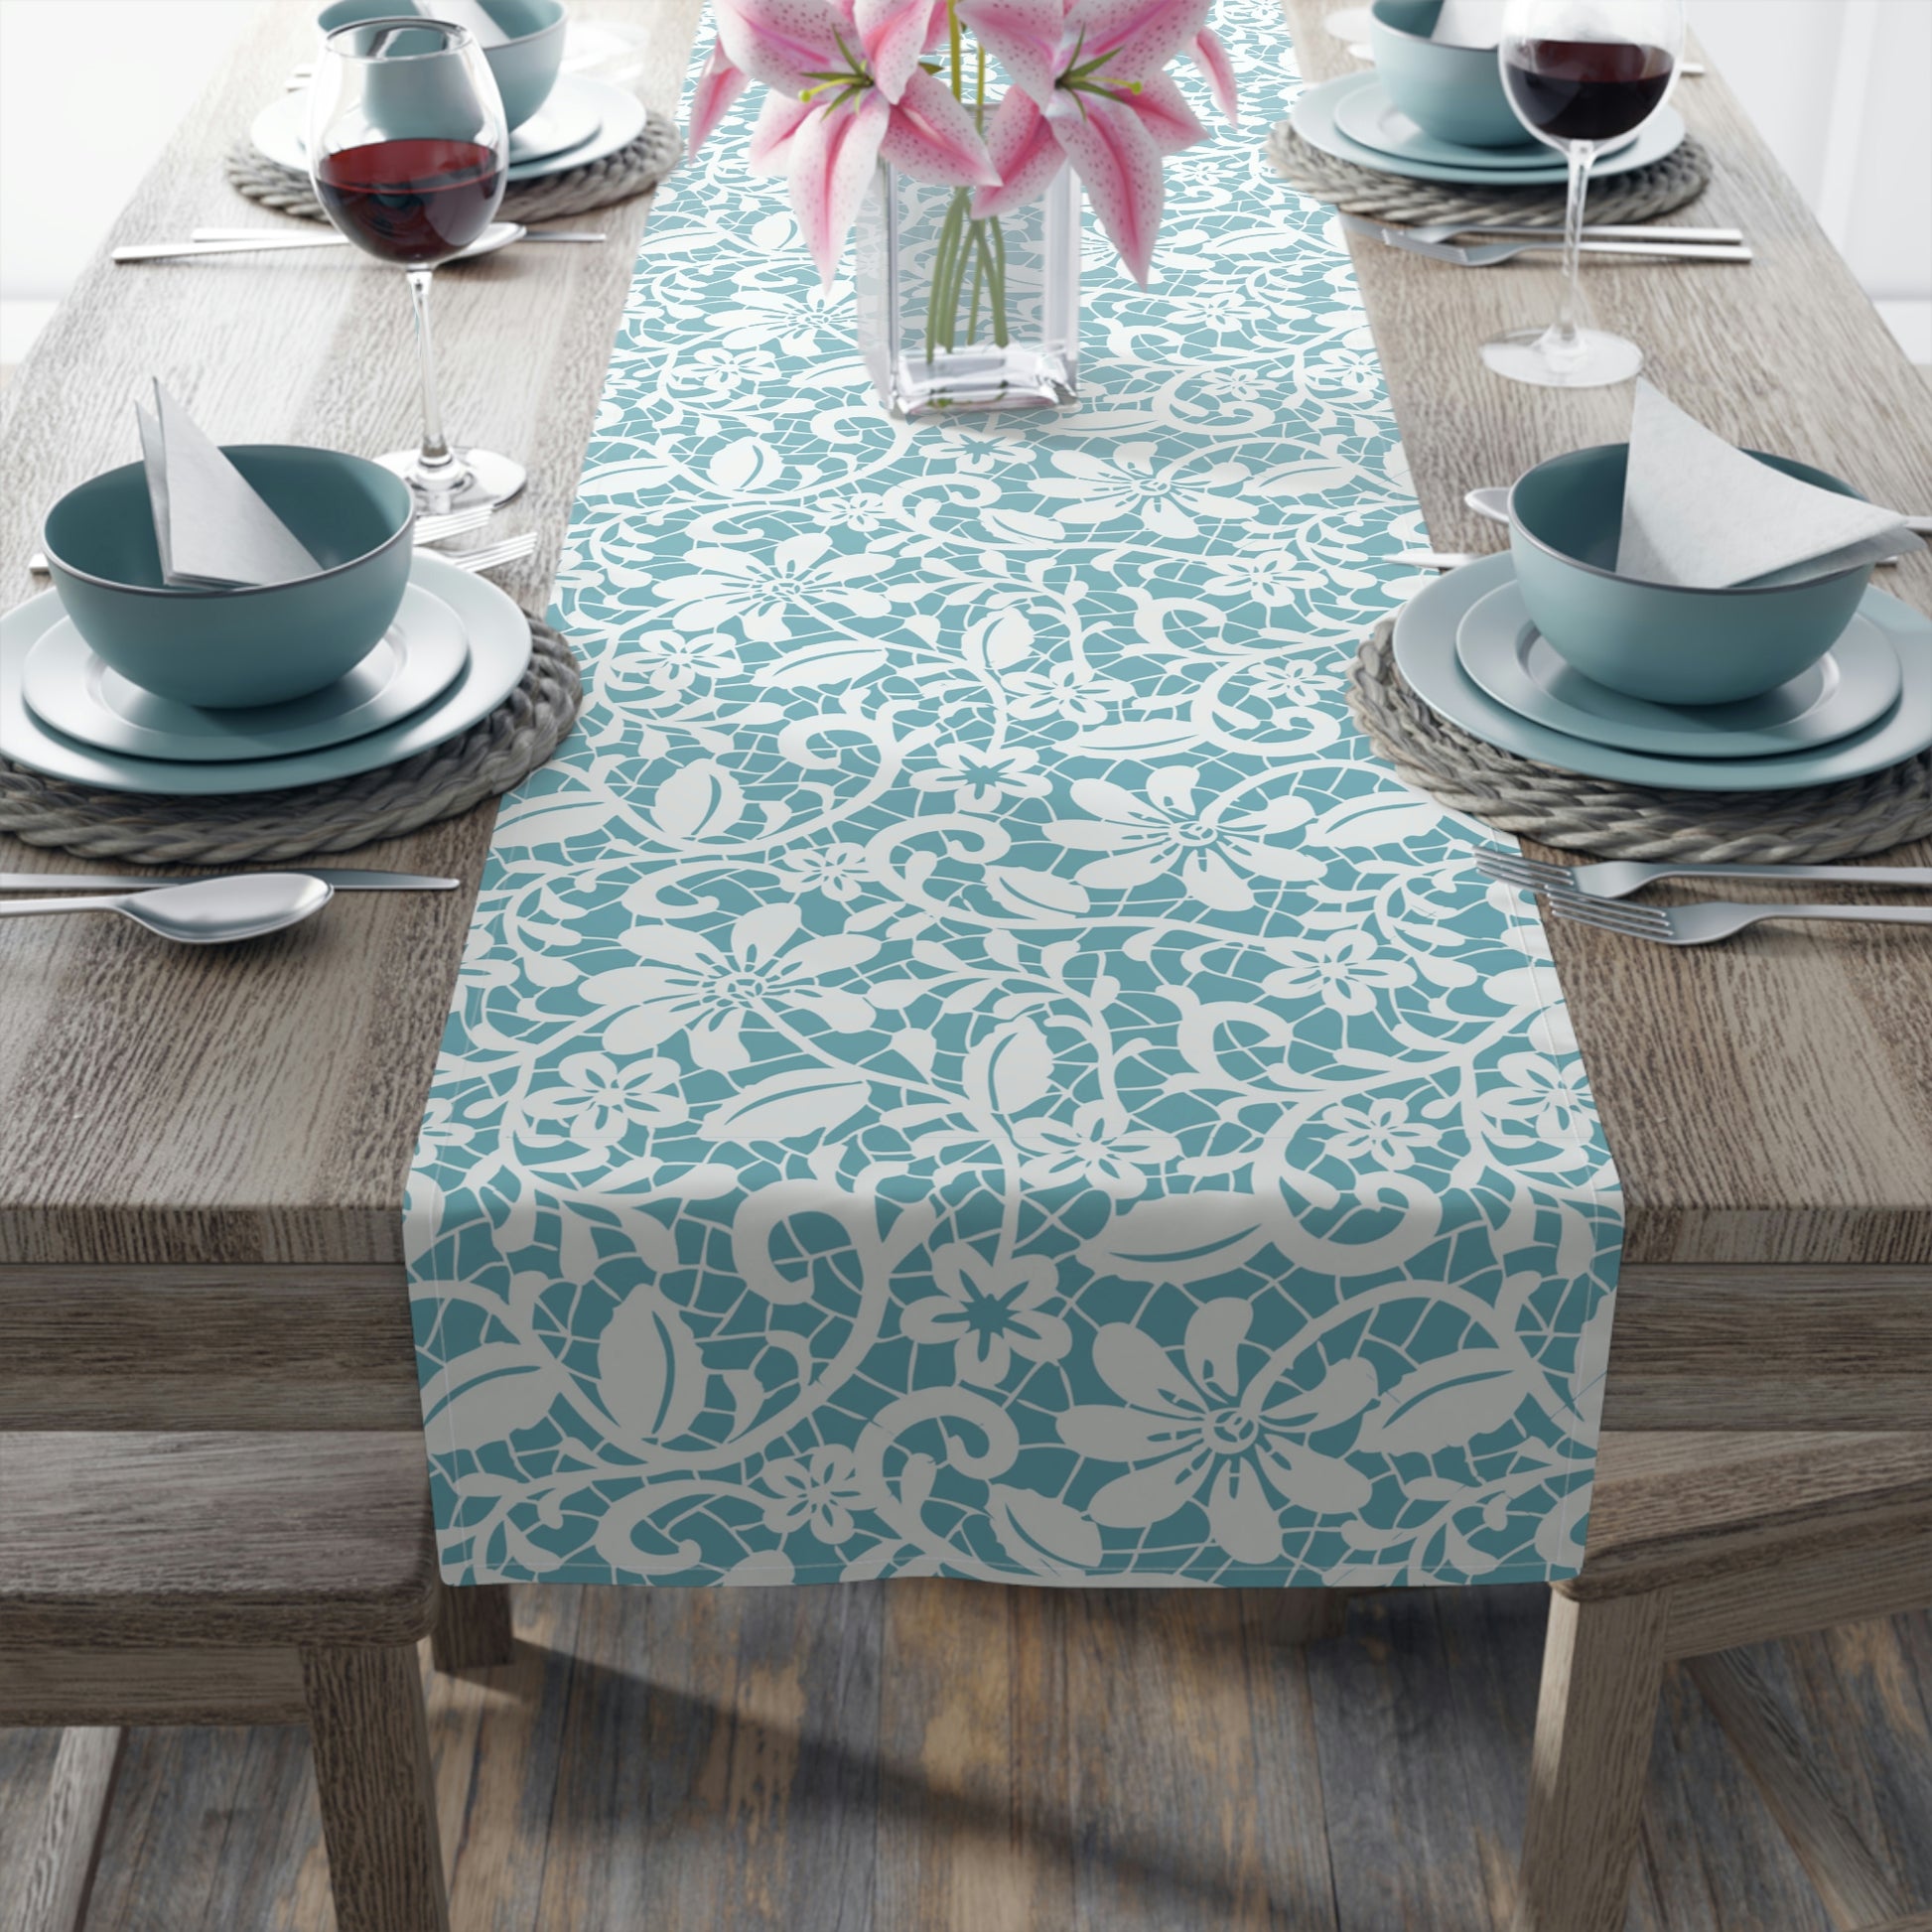 blue and white floral table runner